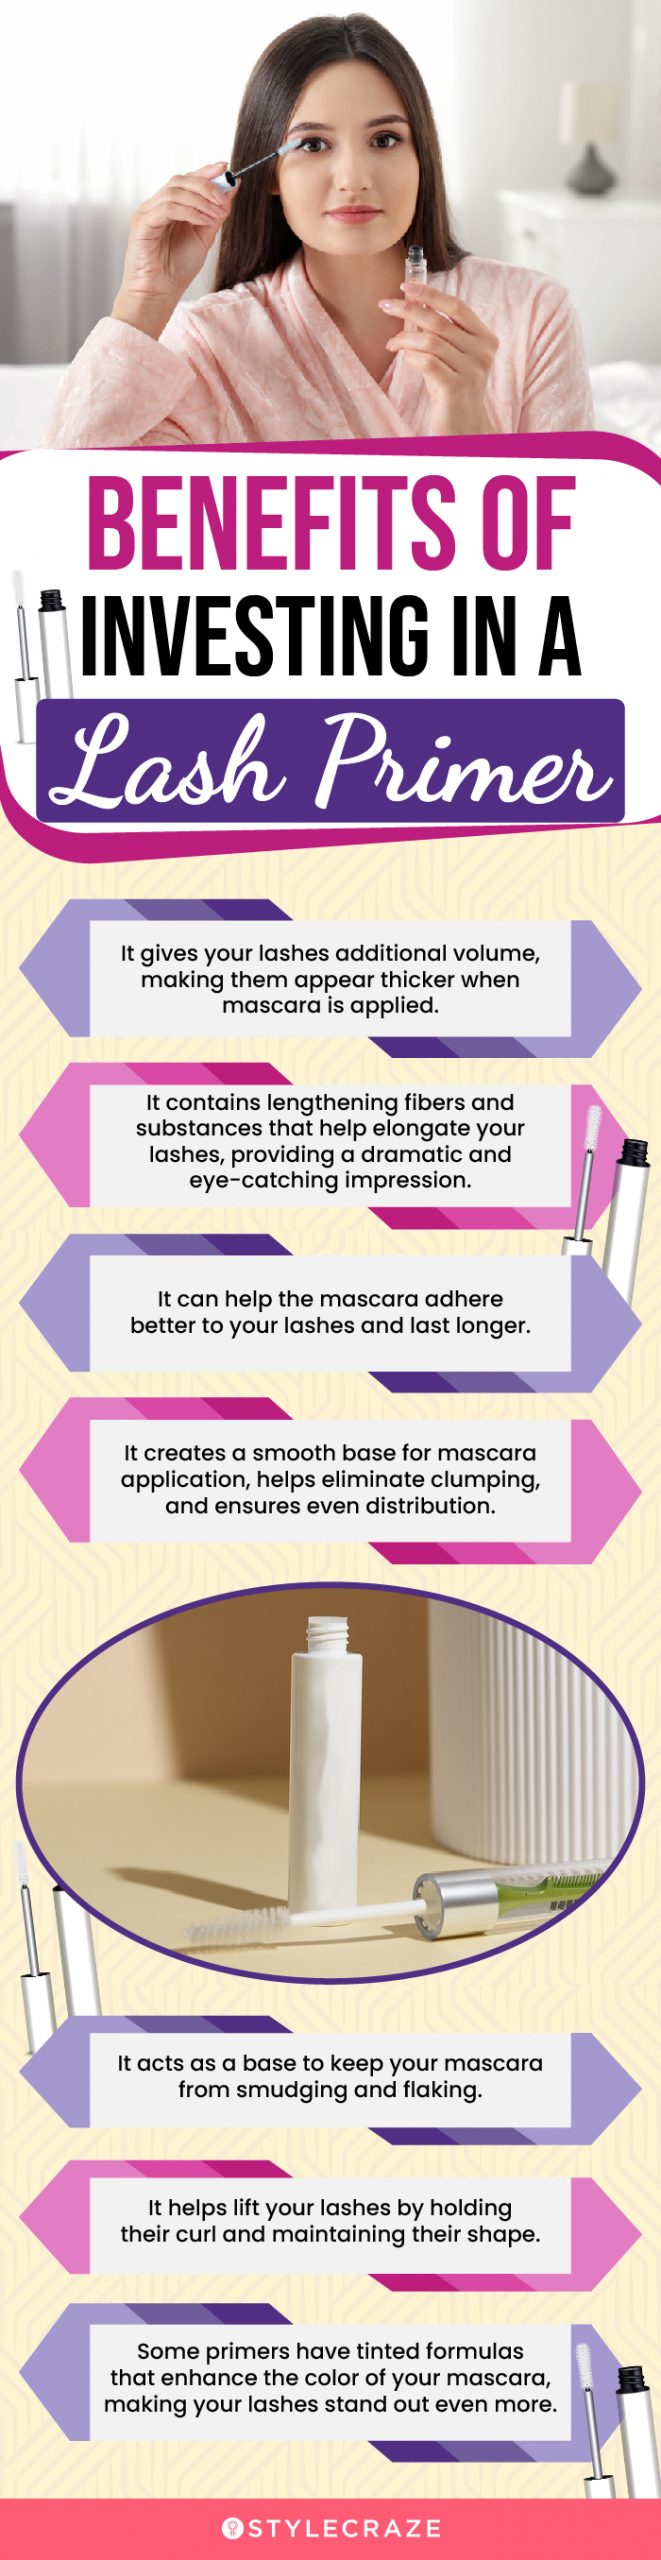 Benefits Of Investing In A Lash Primer (infographic)